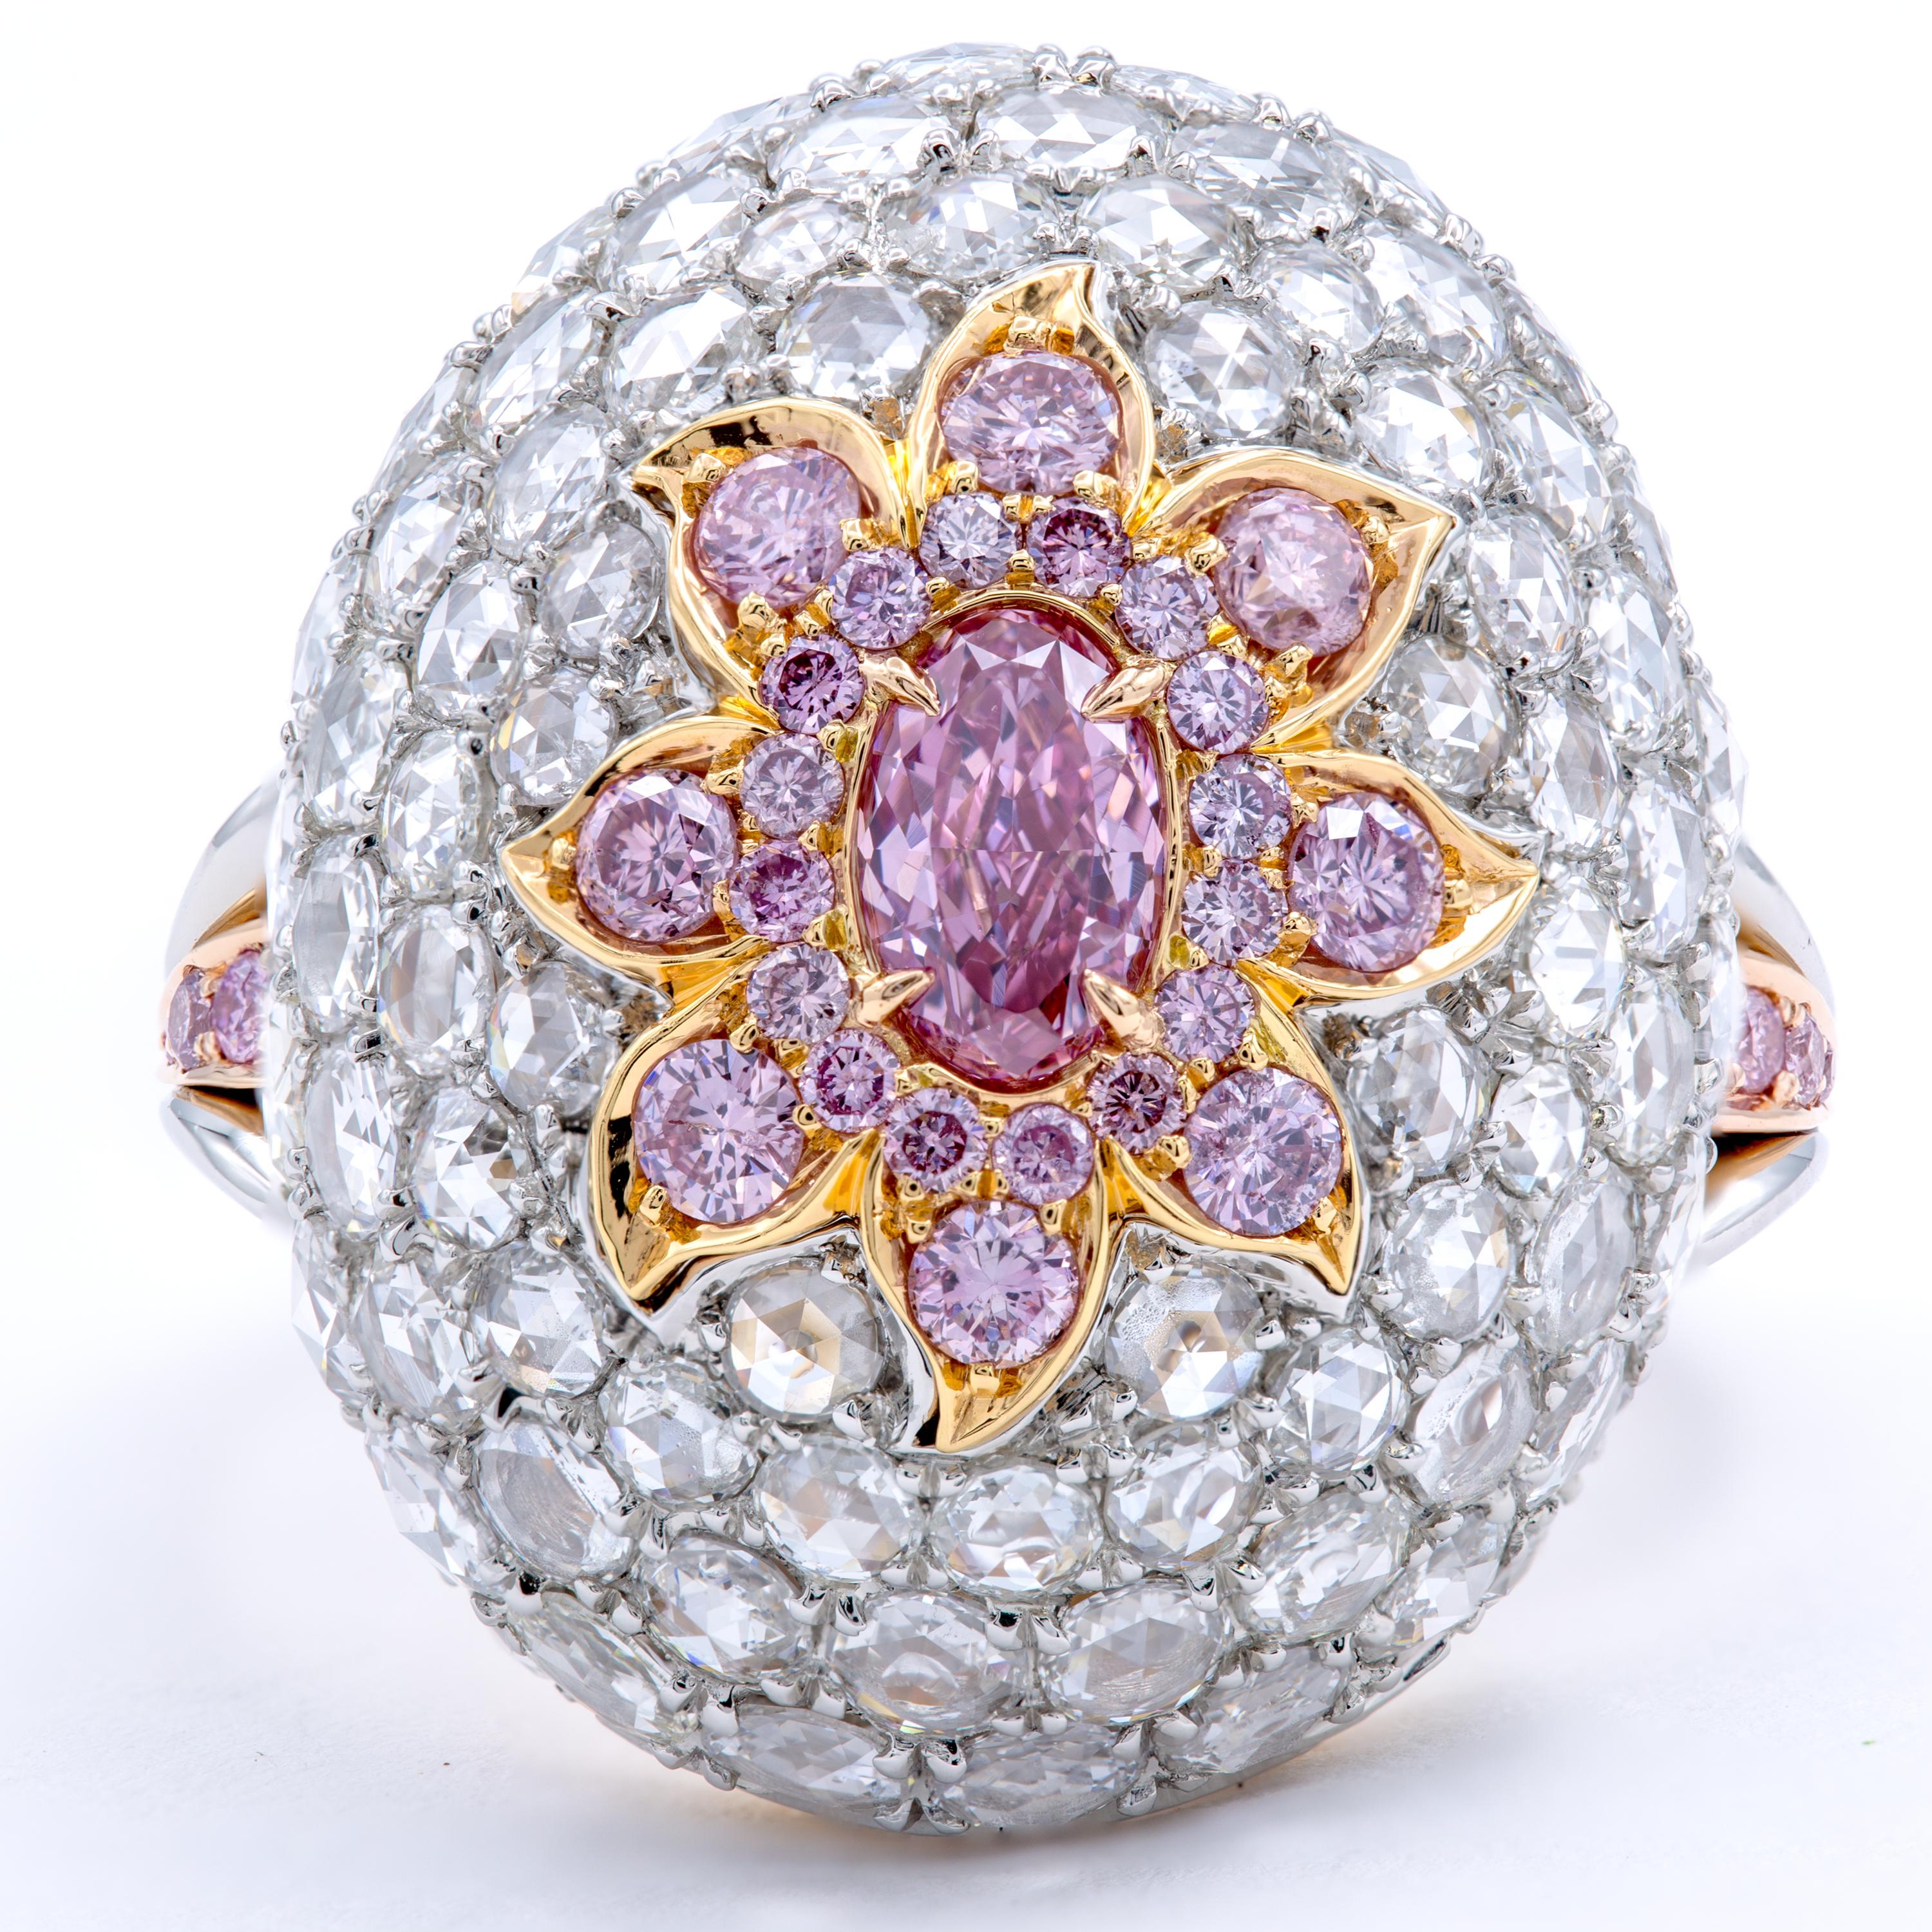 Countless Pavé set white diamonds support this exotic beauty abloom with scintillating petals of pink diamonds and a GIA Certified Natural Fancy Purplish Pink Diamond. This romantic center-stone emanates a rich warm pink color with deeper tones of